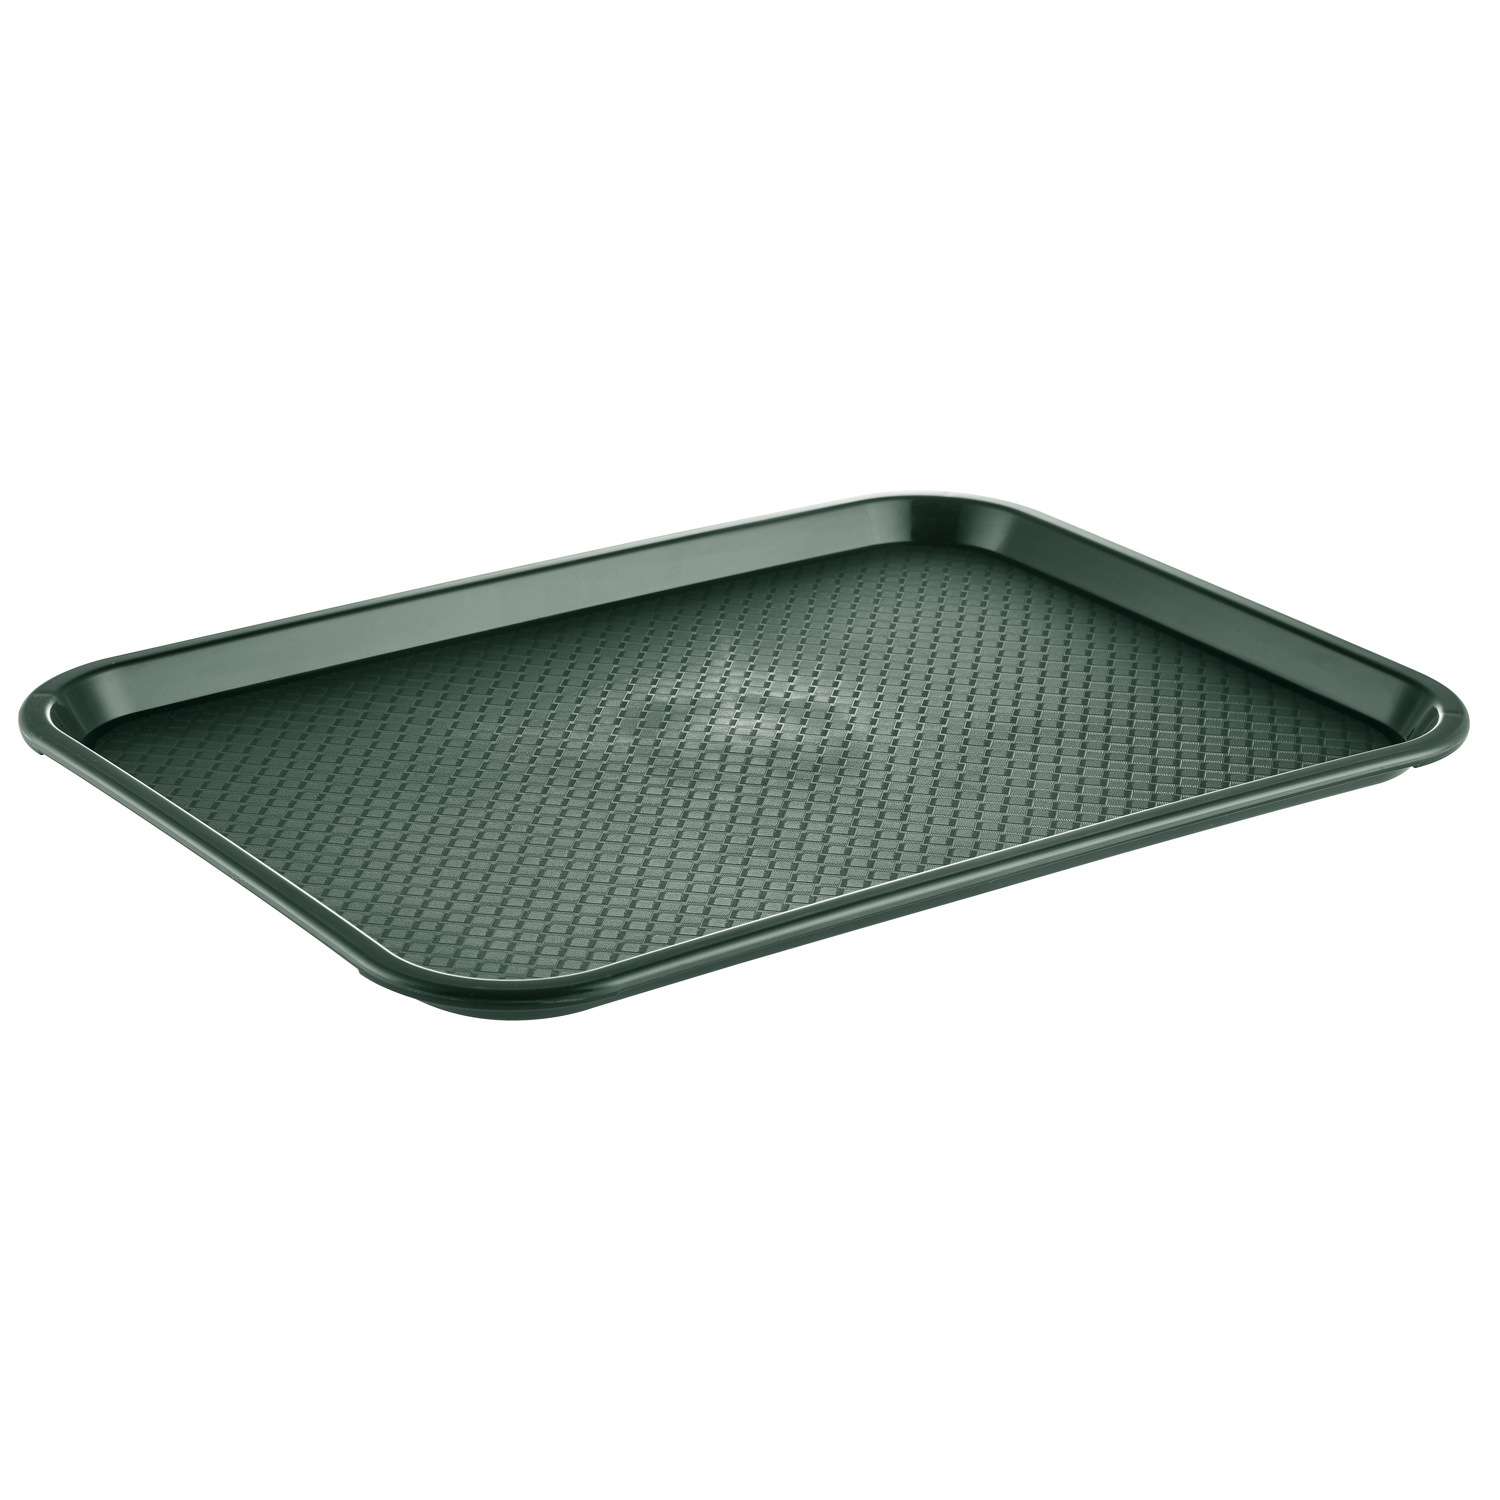 CAC China DSPT-1418G Green Fast Food/Cafeteria Tray, 18" x 14" 